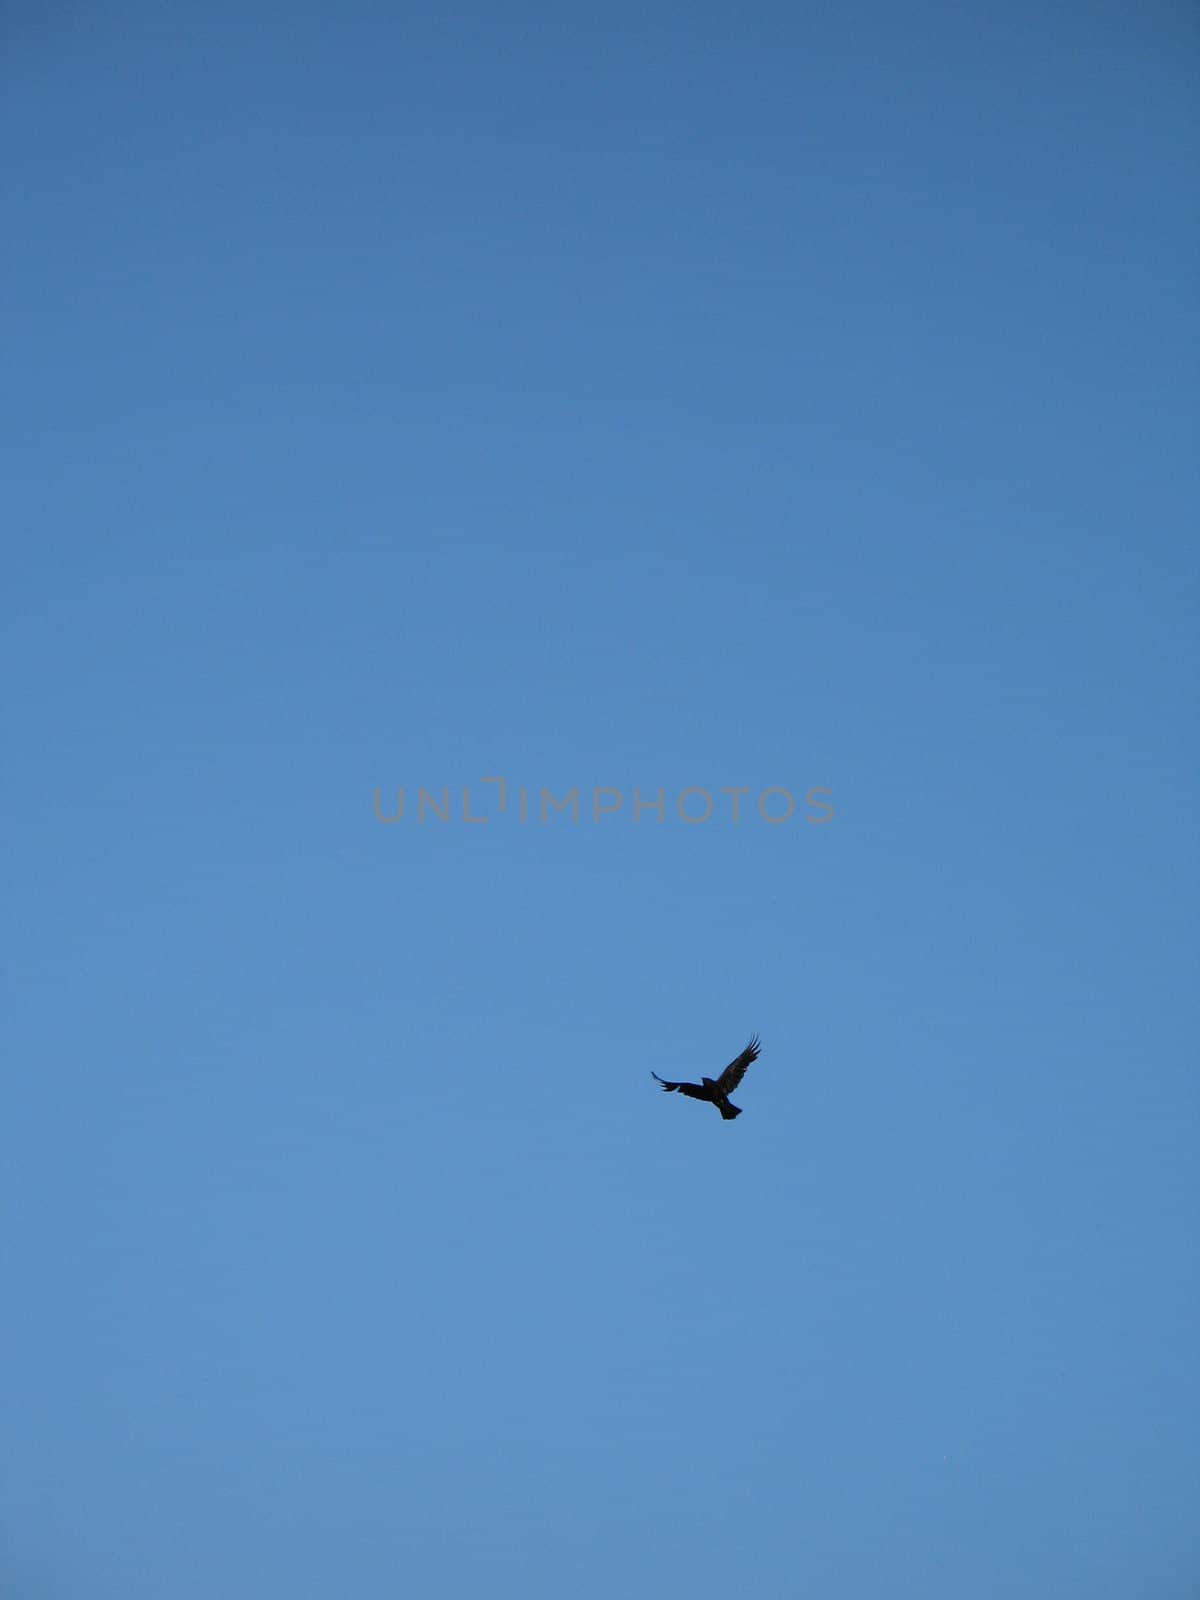 crow flying in the blue sky by mmm